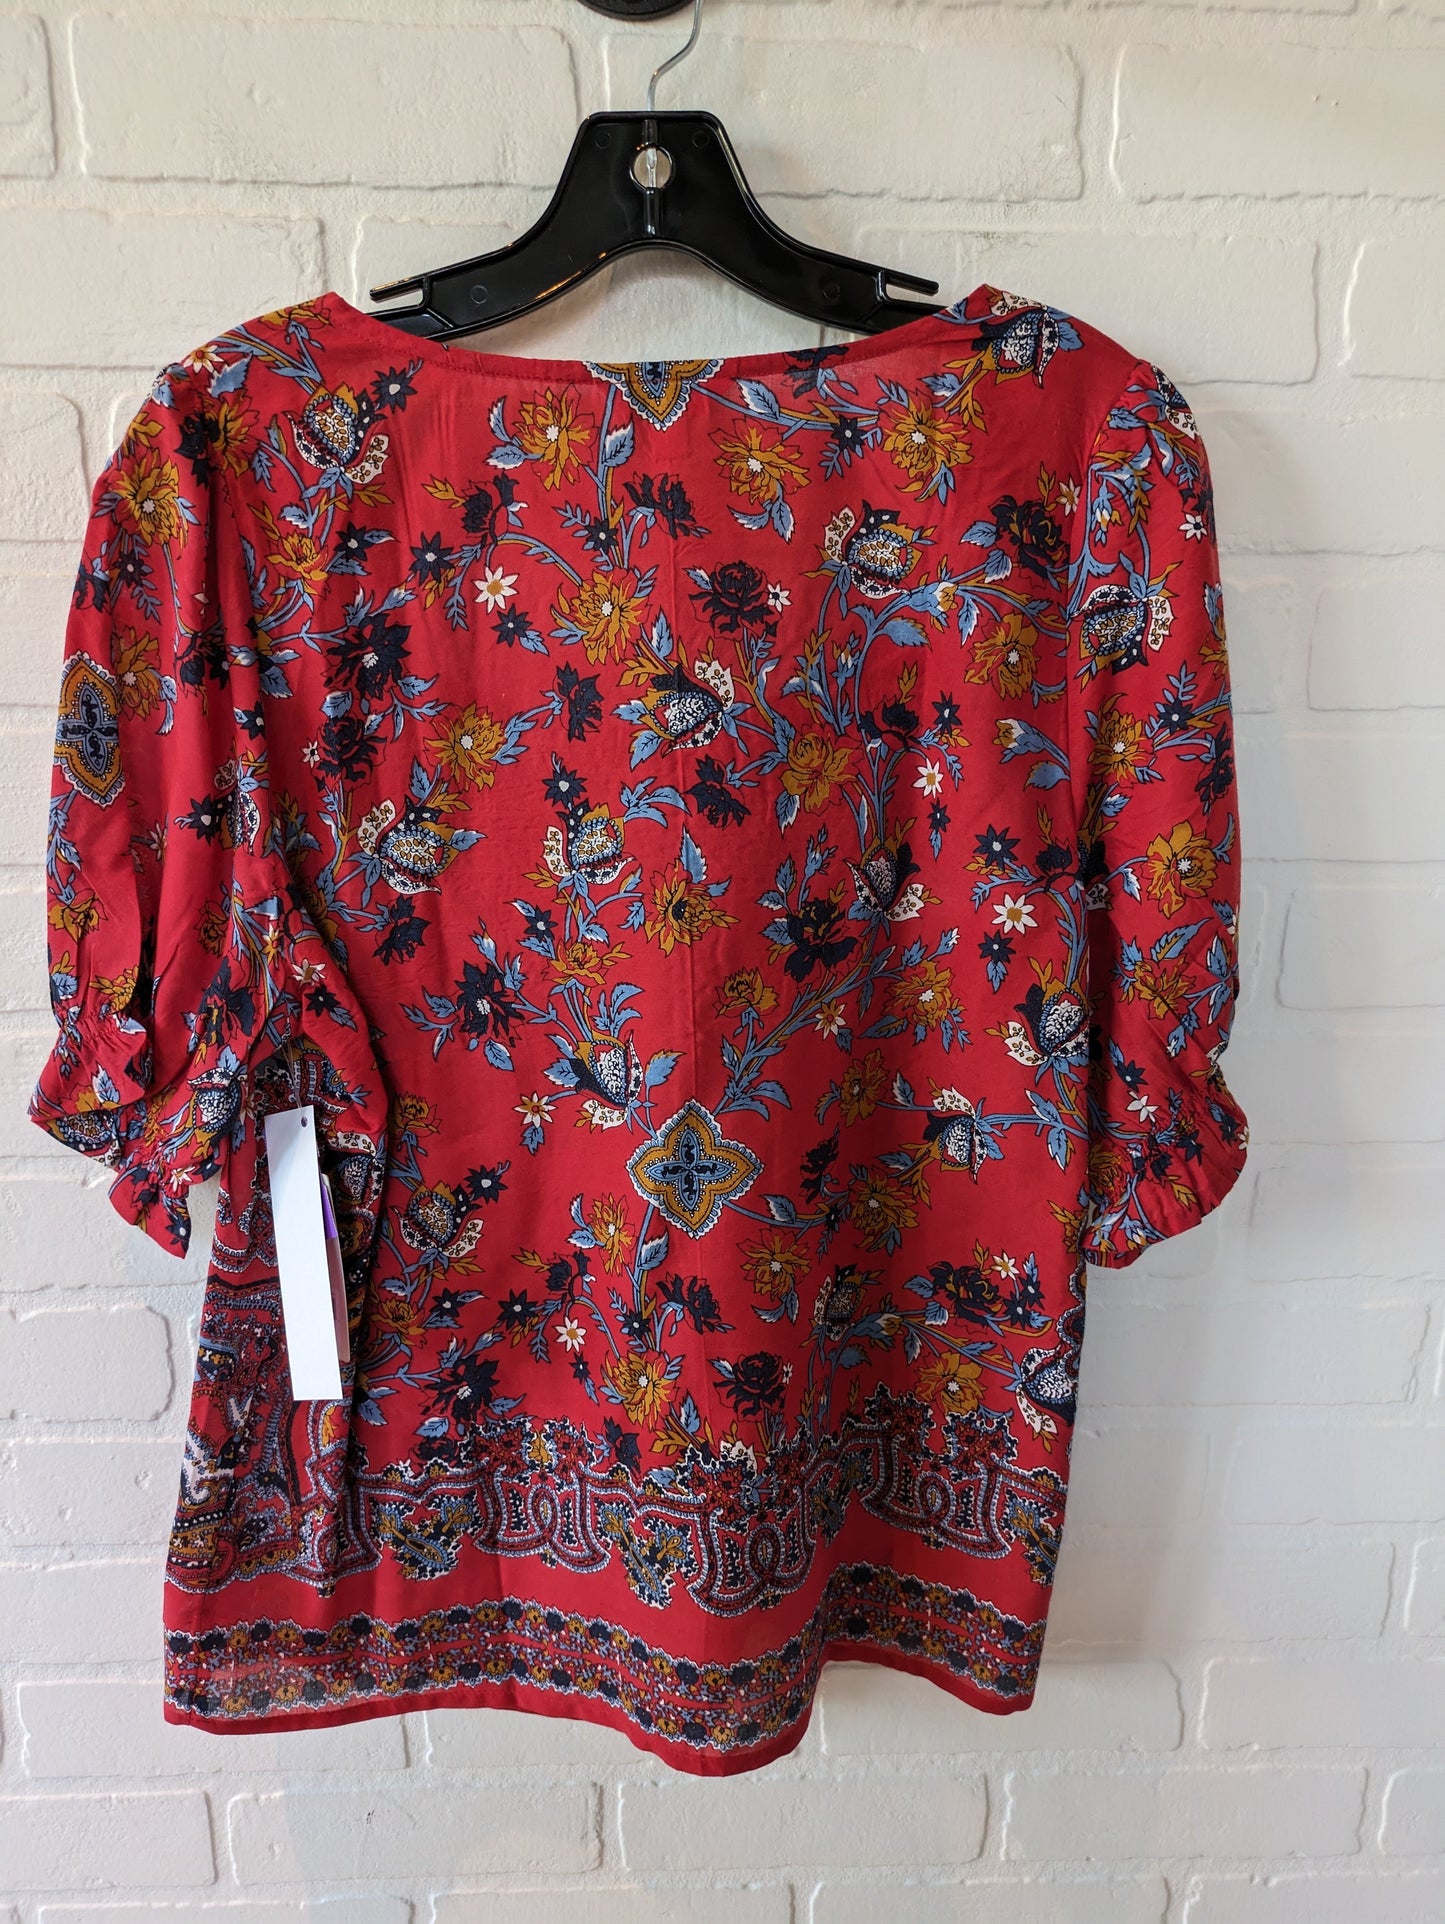 Red & Tan Blouse 3/4 Sleeve Lucky Brand, Size L